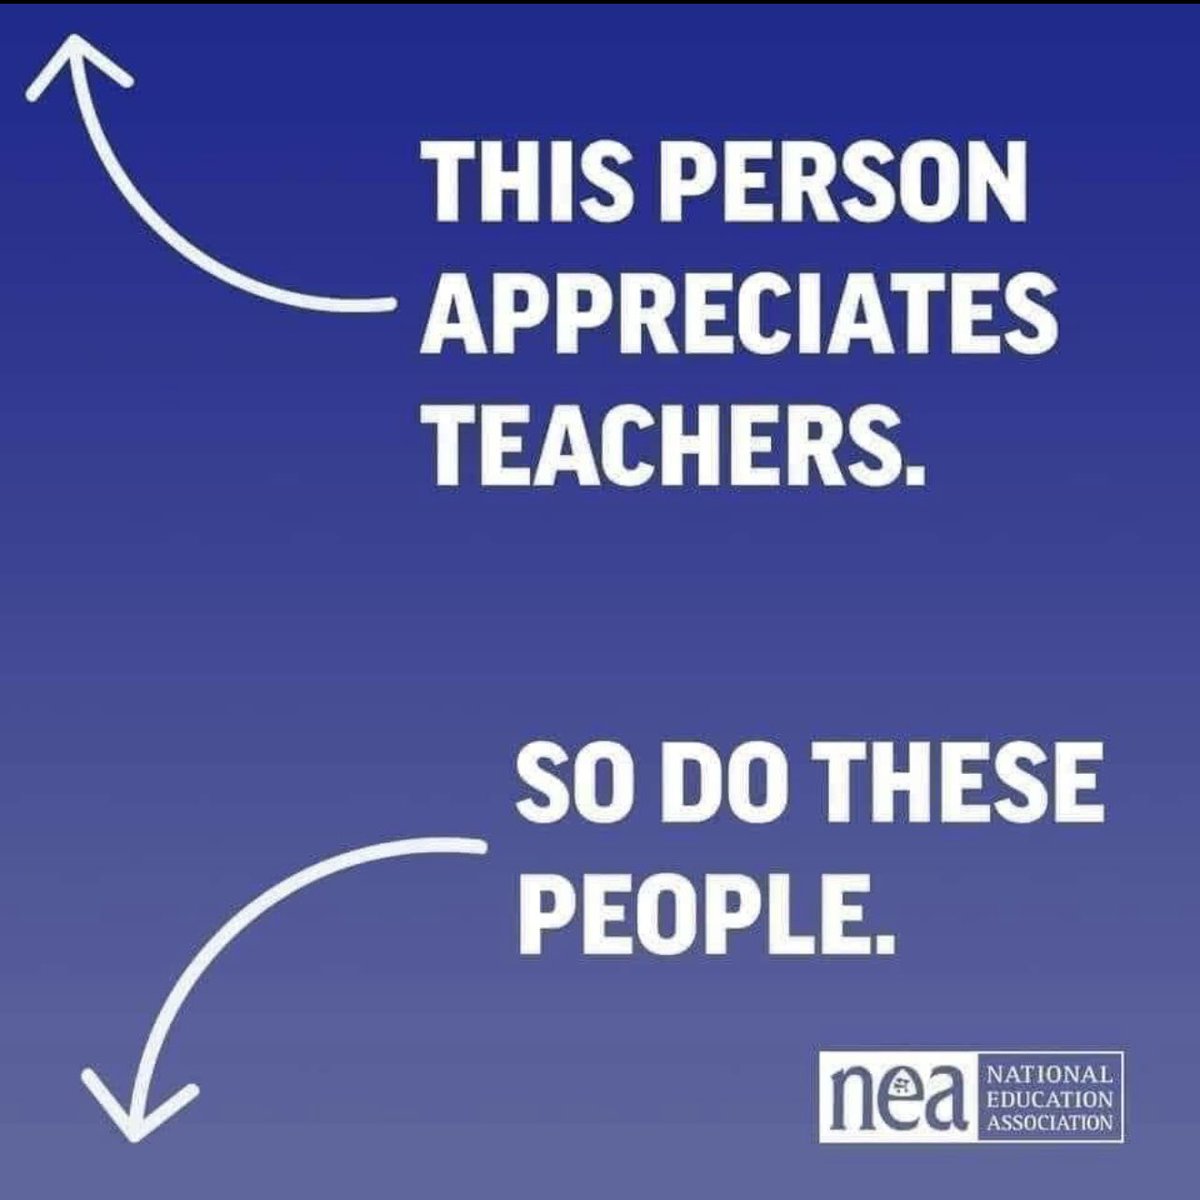 Happy Teacher Appreciation Week to all of my colleagues and teacher friends in Columbus City Schools, Reynoldsburg City Schools and Shaker Heights City Schools! Your work is appreciated!! 💯💯💯